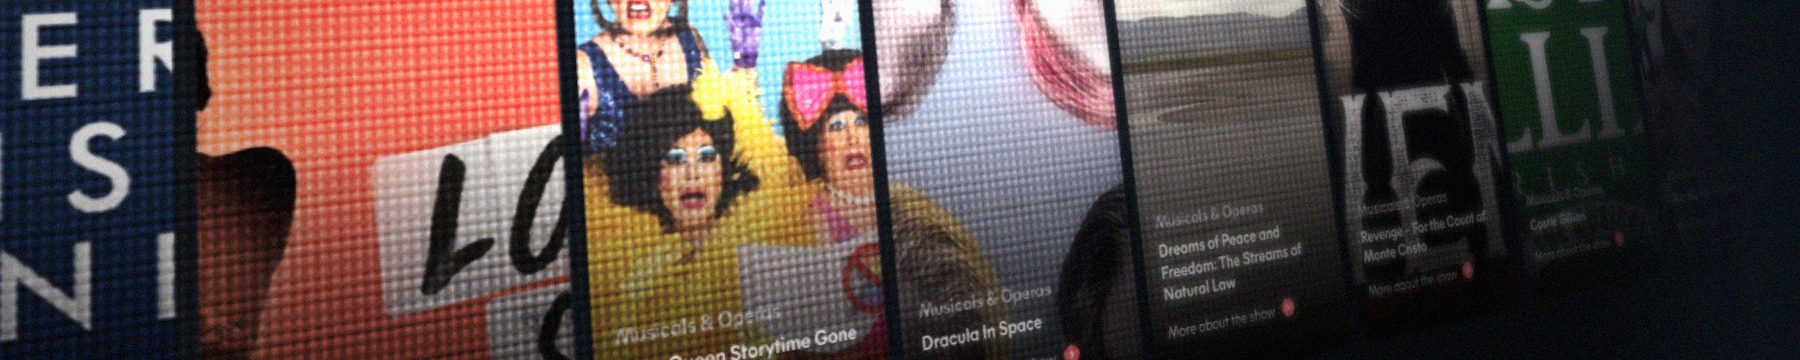 A selection of Fringe shows displayed digitally.